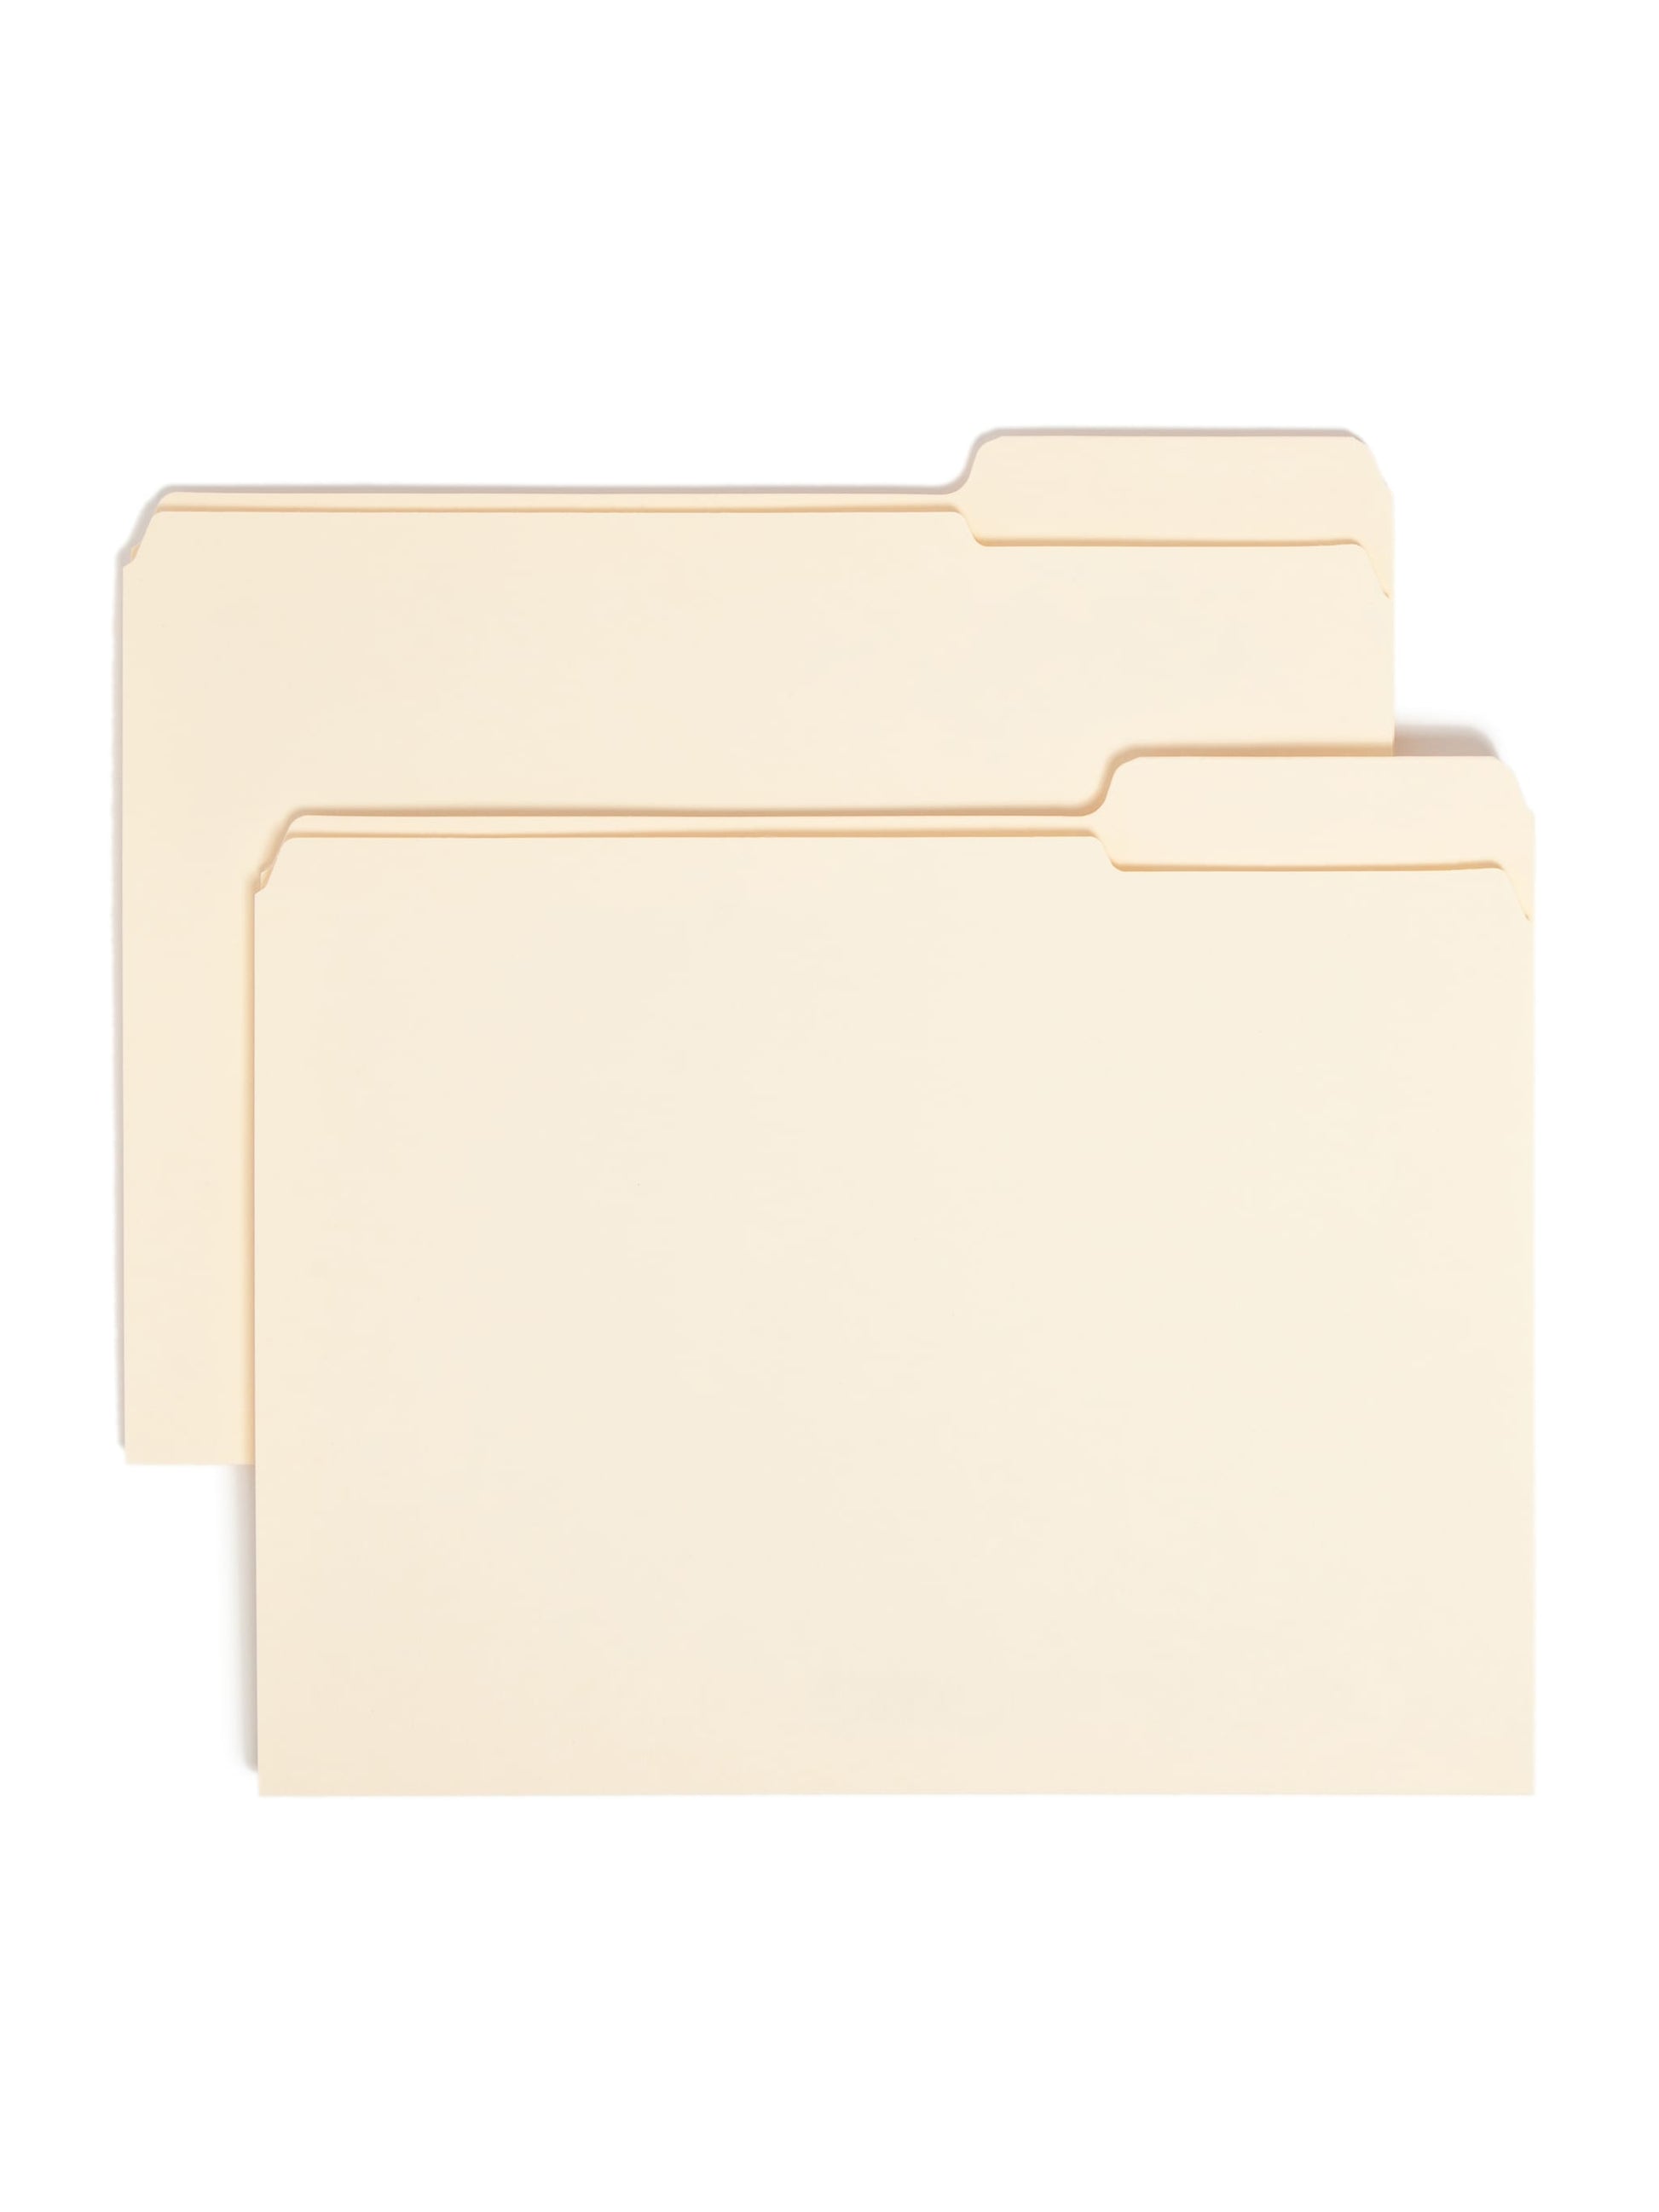 Reinforced Tab File Folders, 1/3-Cut Right Tab, Manila Color, Letter Size, Set of 100, 086486103374